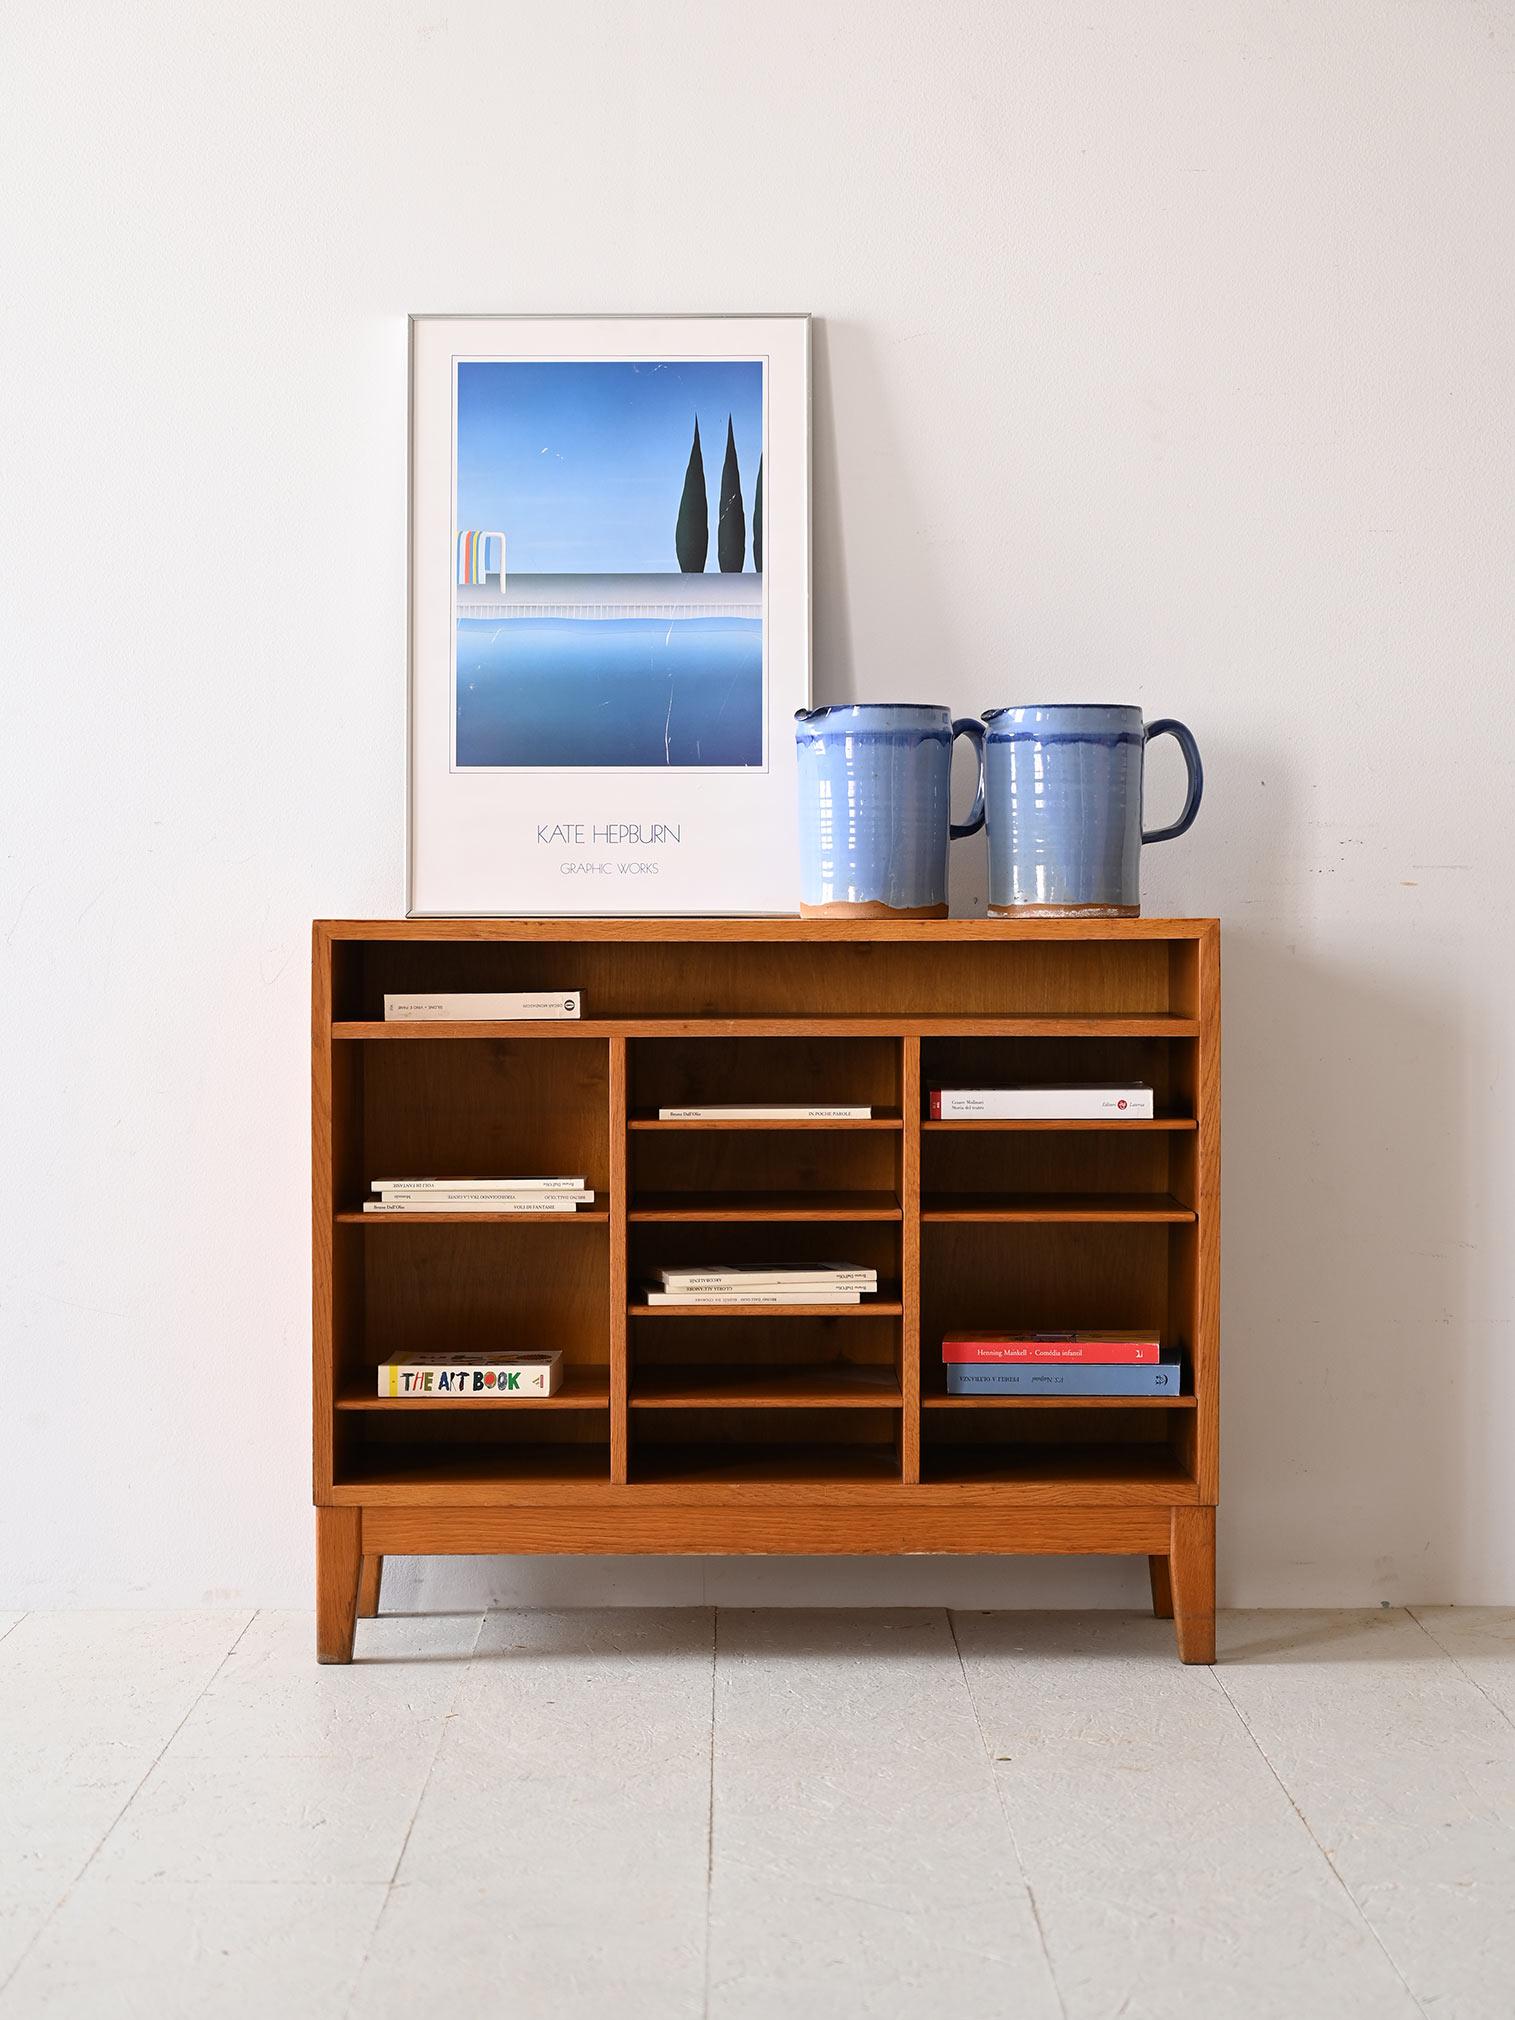 Particular Scandinavian bookcase made of oak wood.

The linearly designed structure shows open shelving units varying in height and size. This multiplicity of shelves offers a variety of display options for books and objects. 
The light wood frame